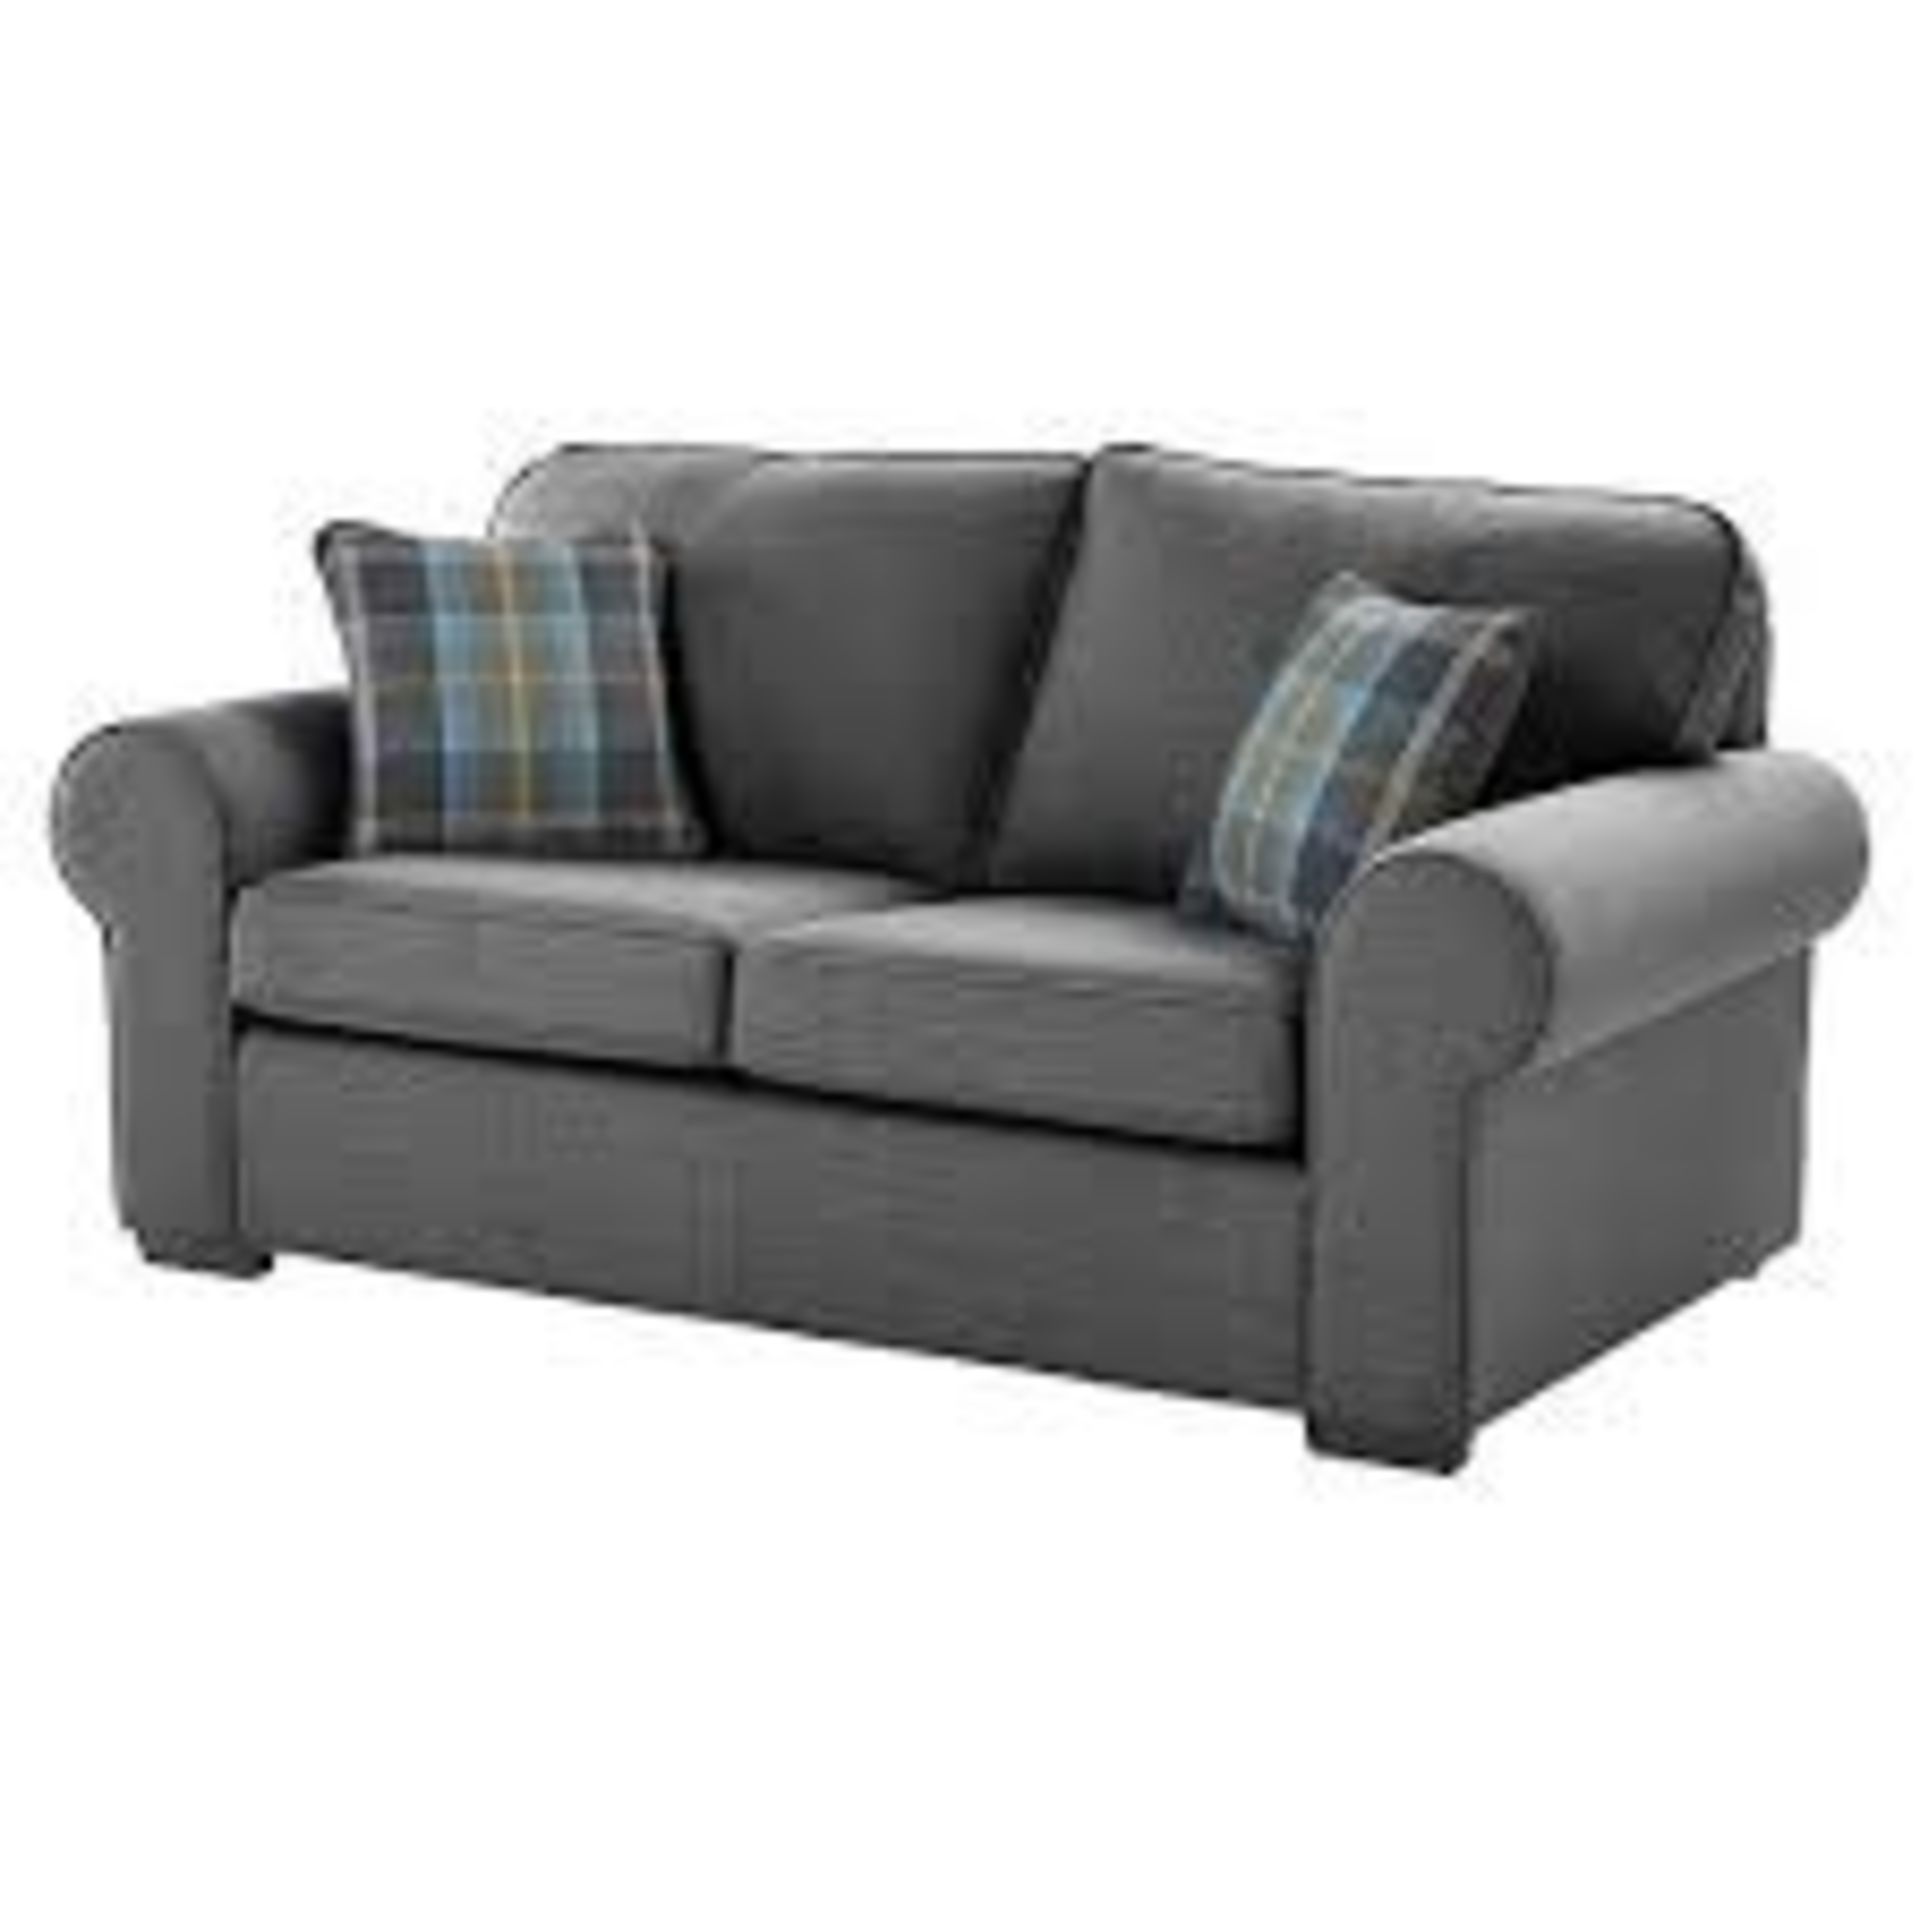 1 BRAND NEW BAGGED EARLEY 3 SEATER SOFA IN DARK GREY (VIEWING HIGHLY RECOMMENDED)